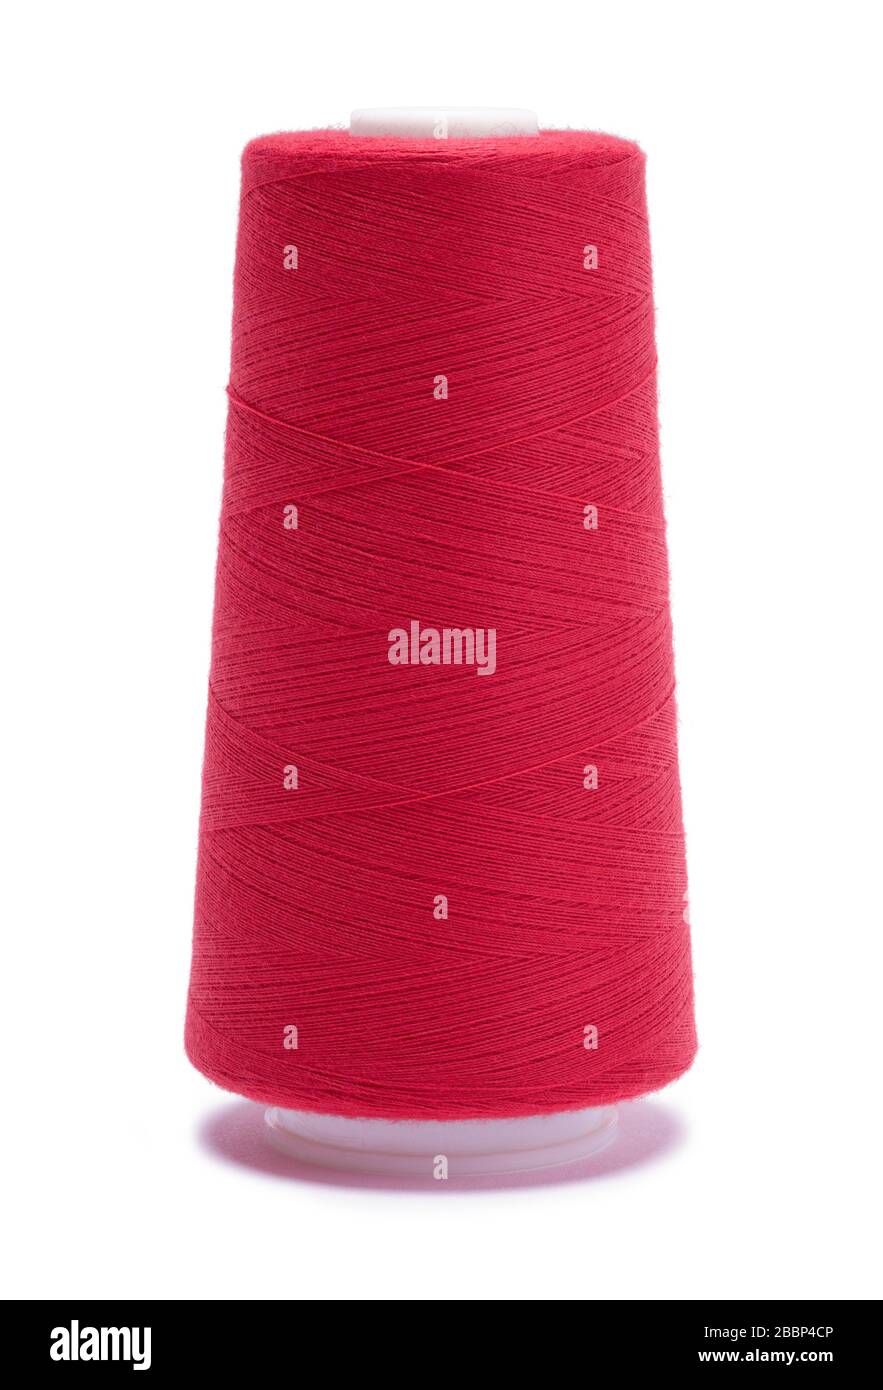 Large Red Thread Spool Isolated on White. Stock Photo